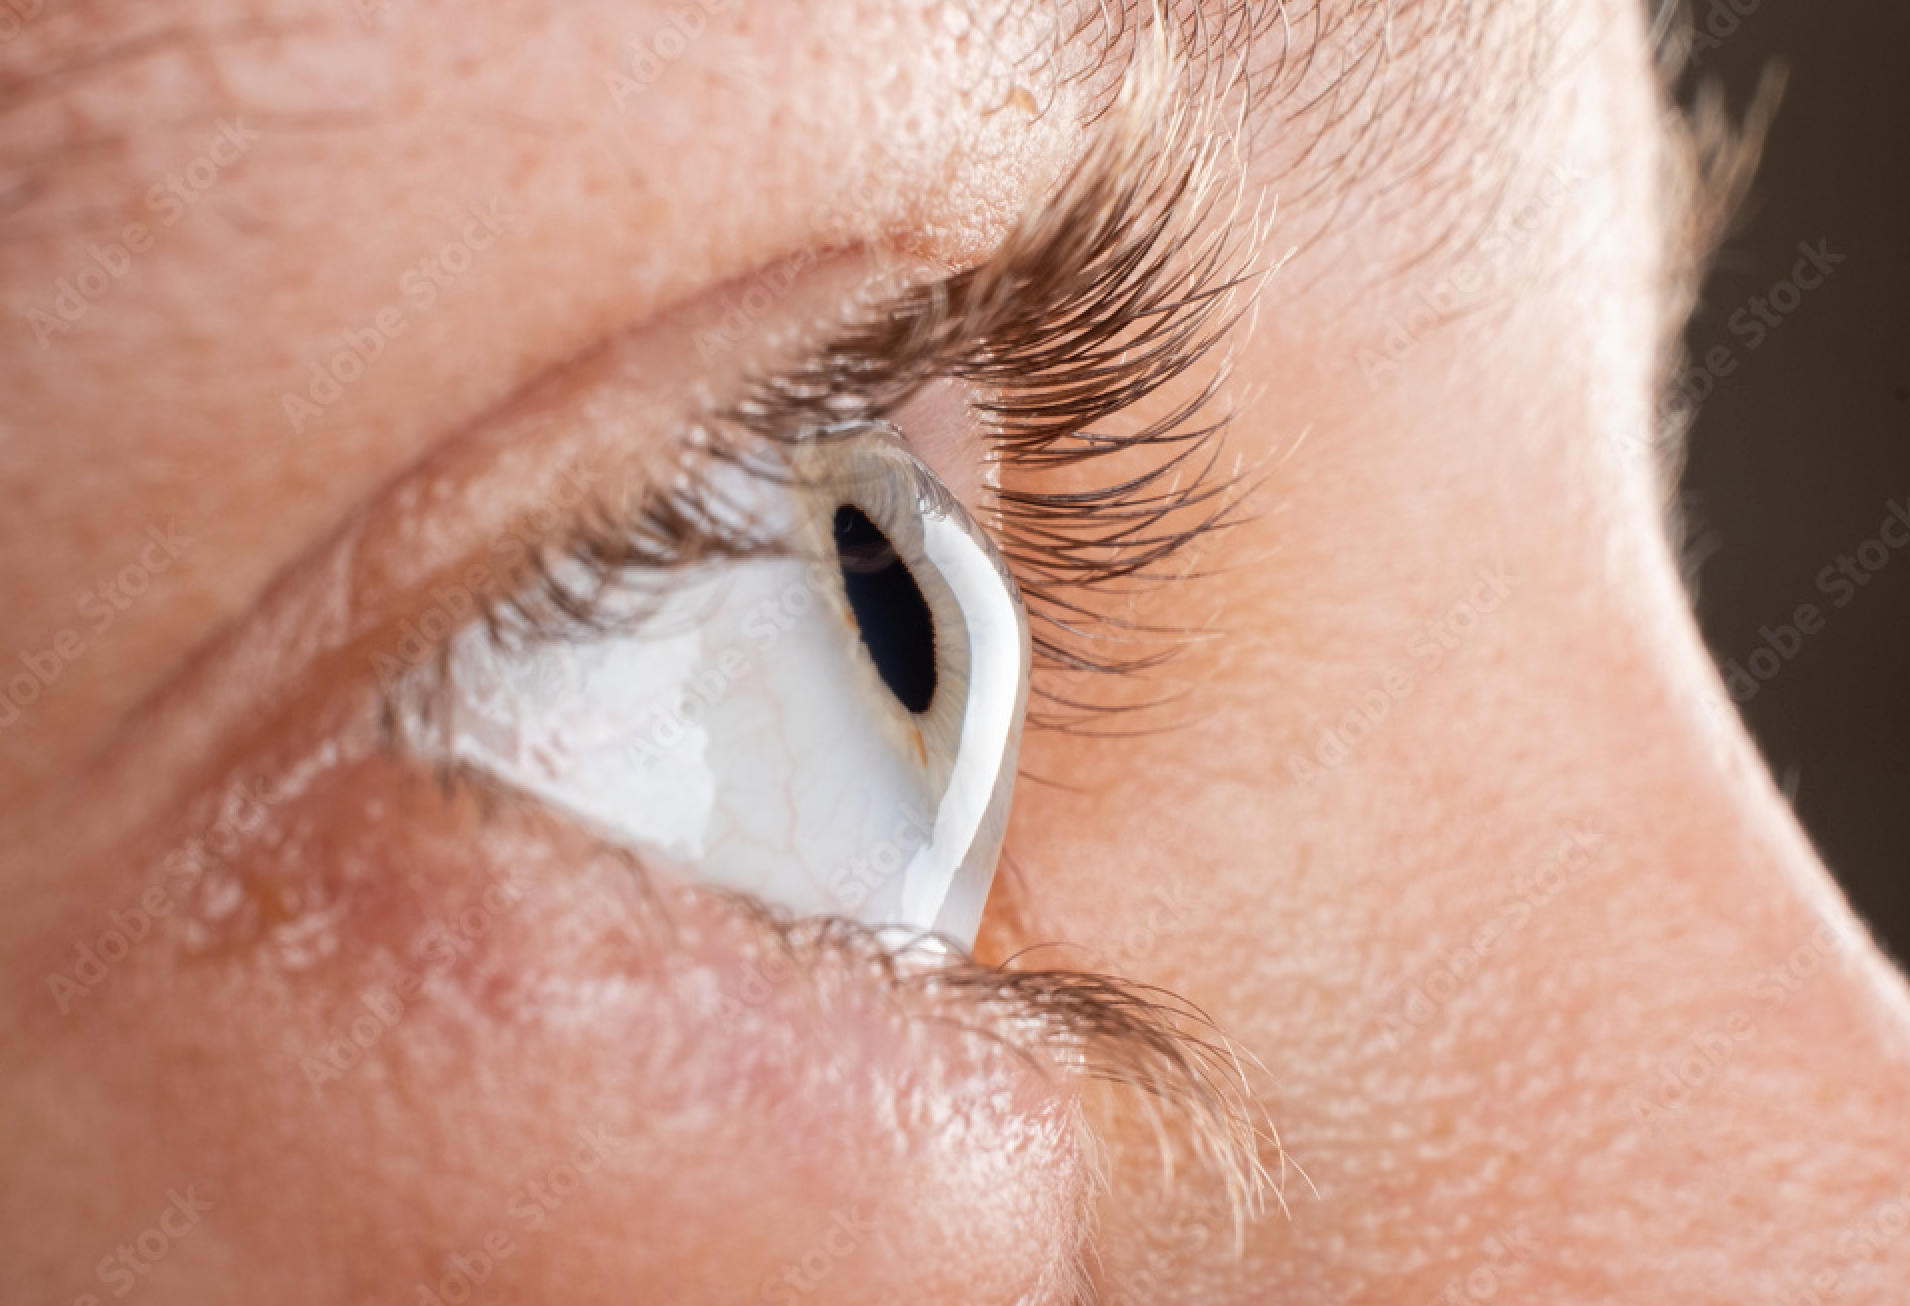 Keratoconus management: Lessons learned from an unusual time